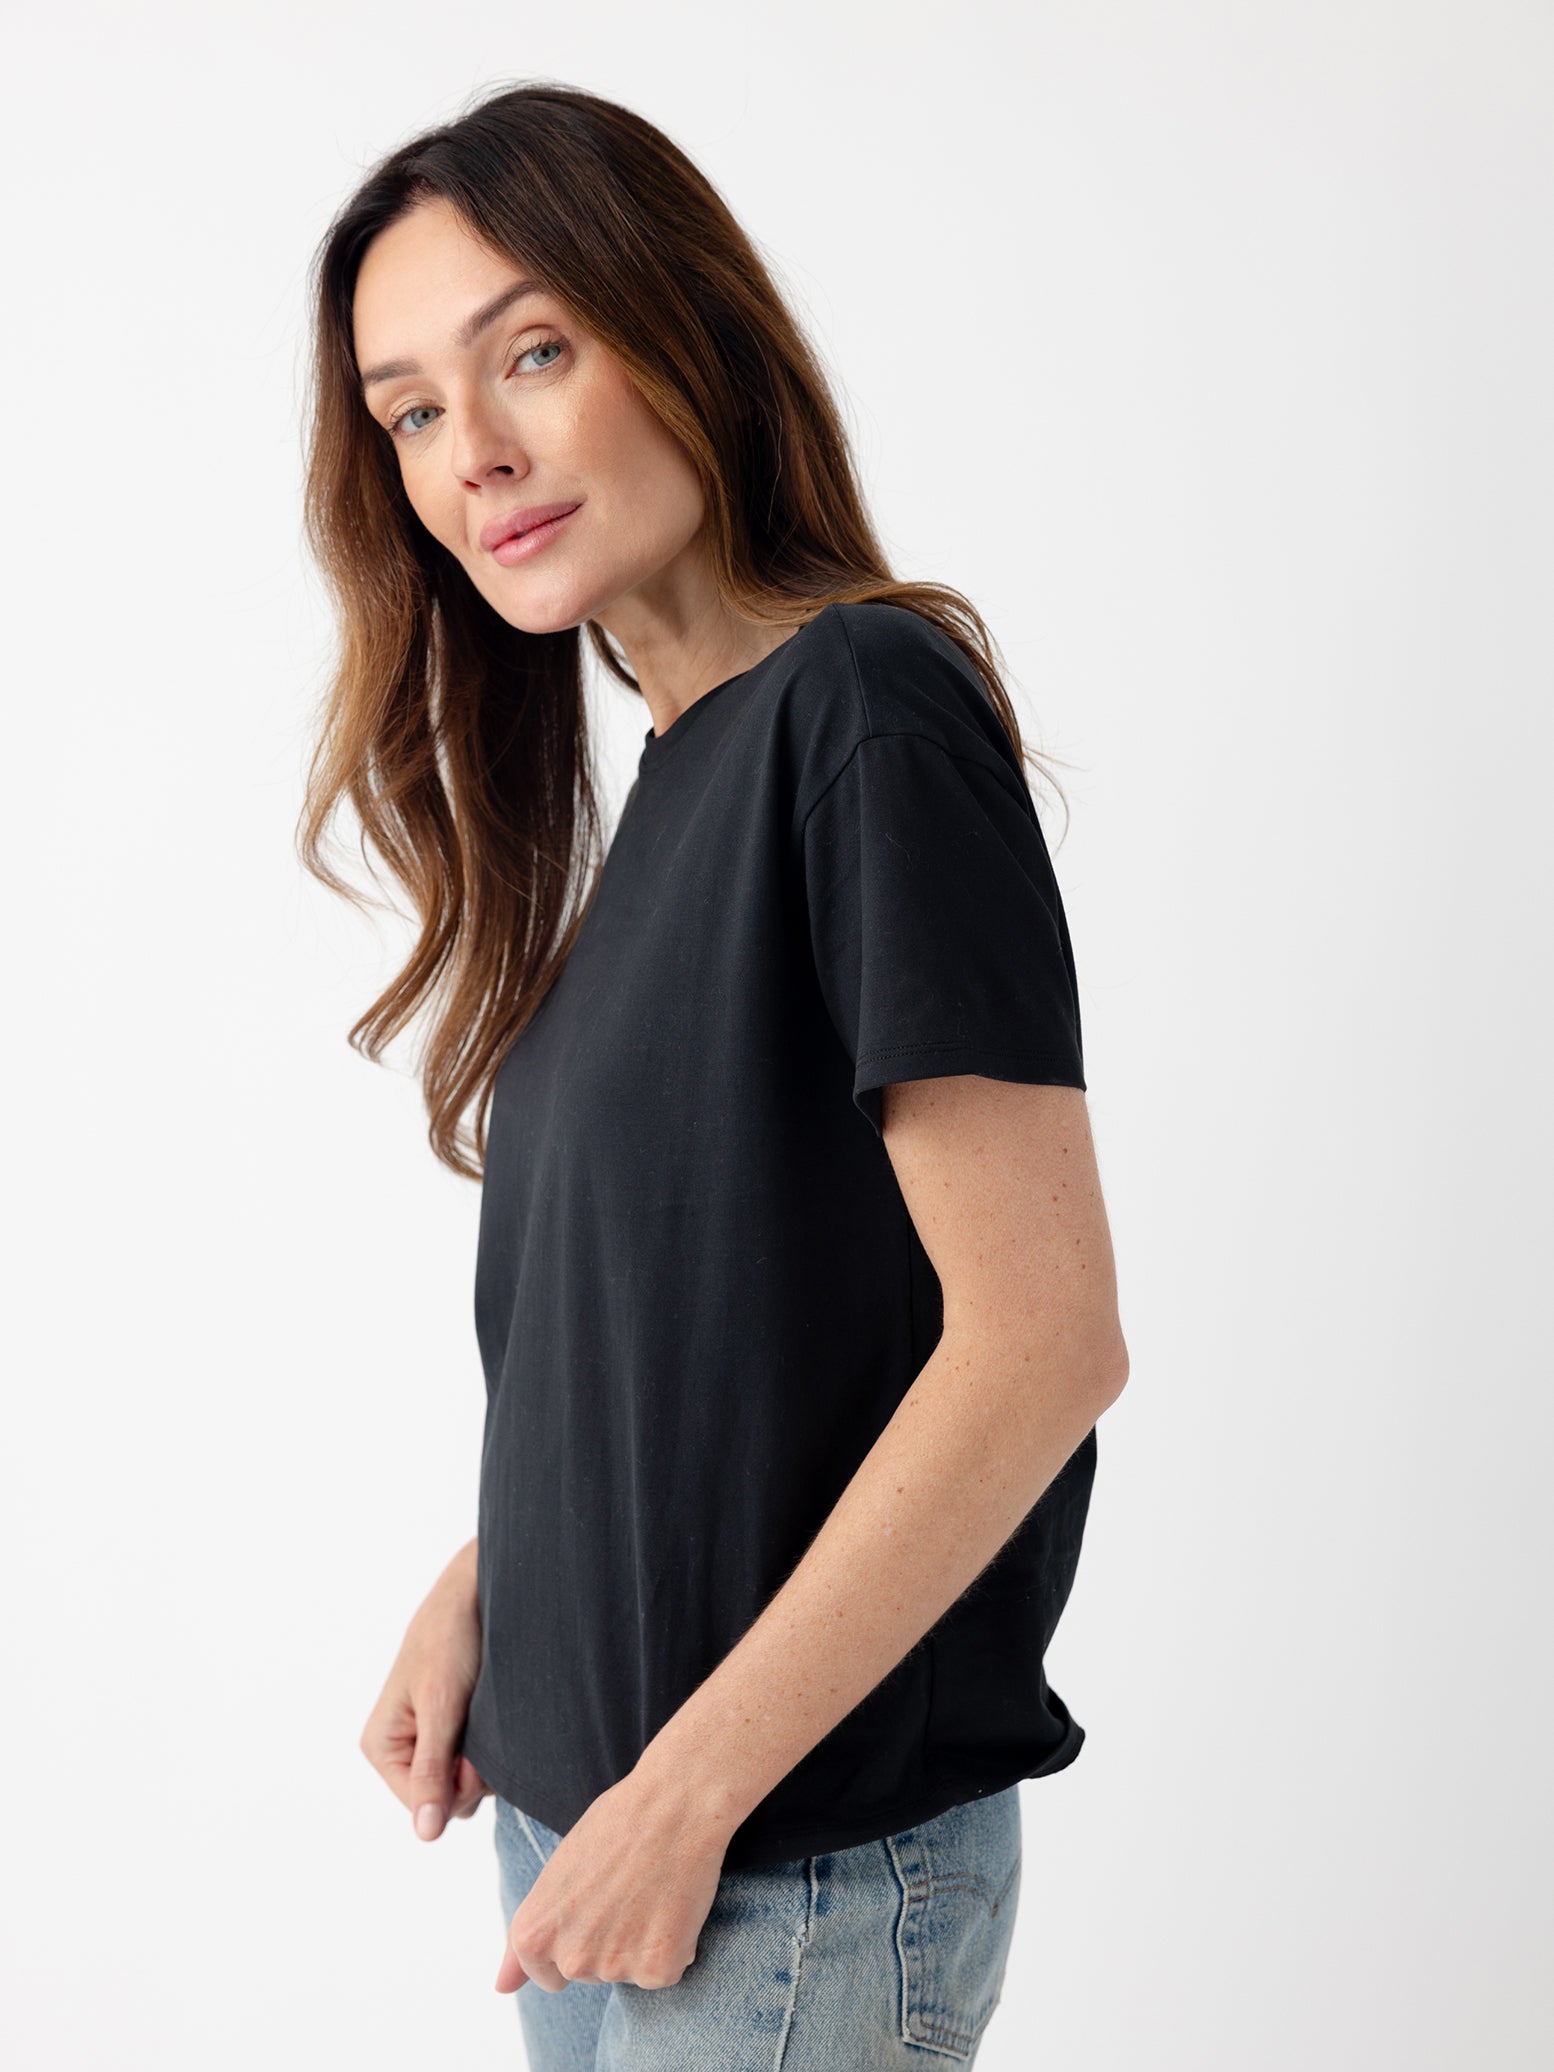 Woman wearing black tee with white background 